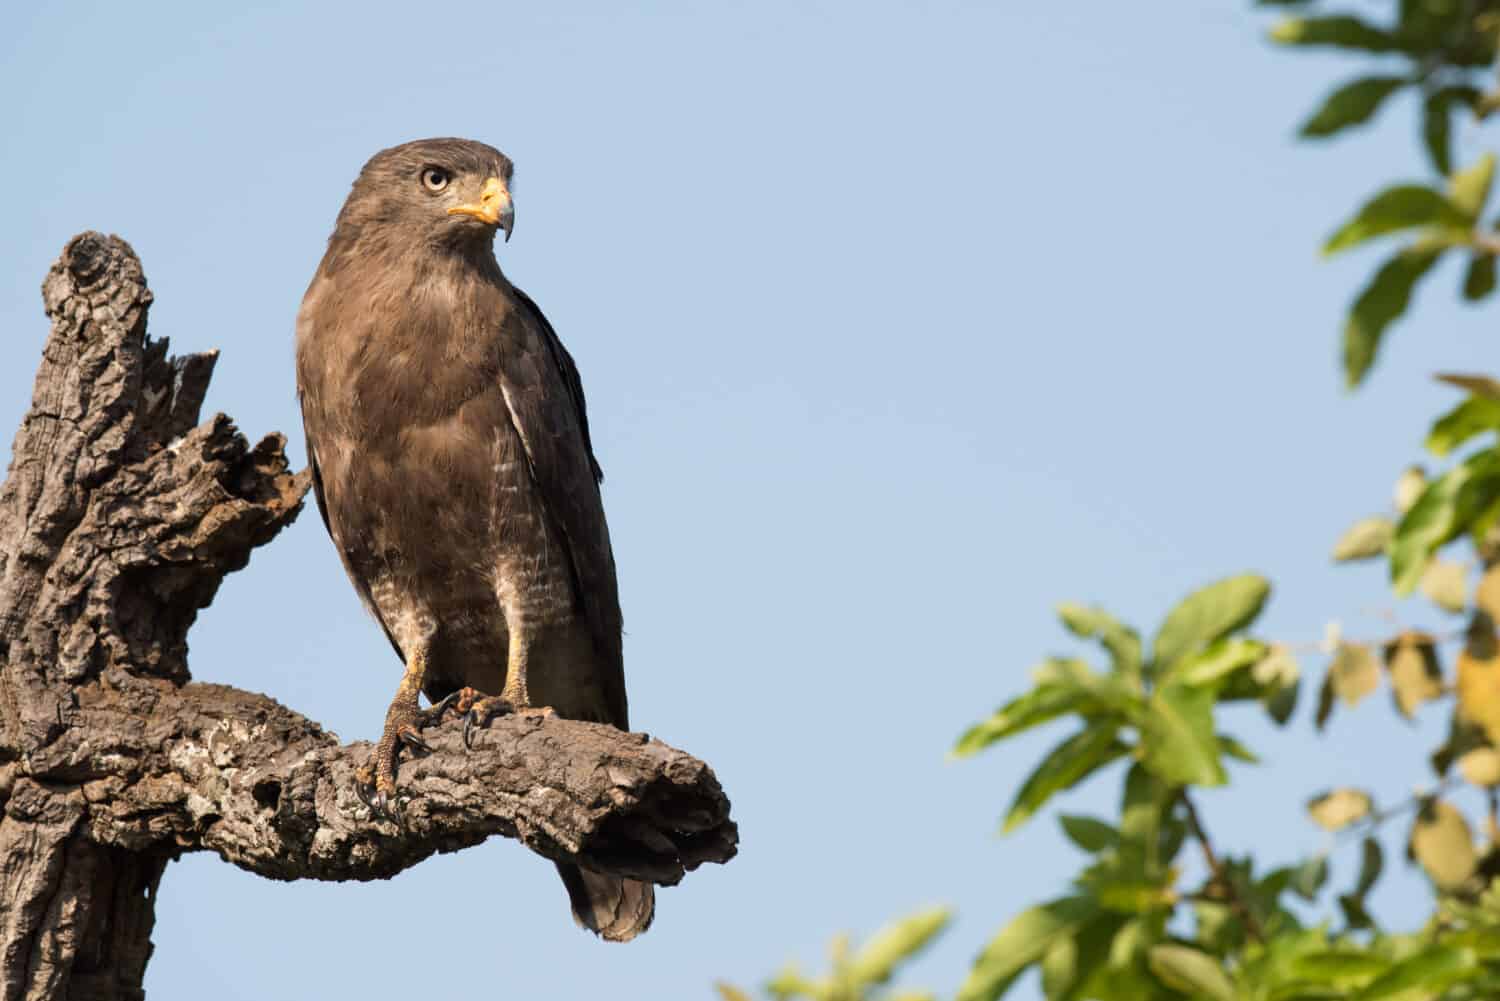 Western banded snake eagle (Circaetus cinerascens) perched on a dead tree limb